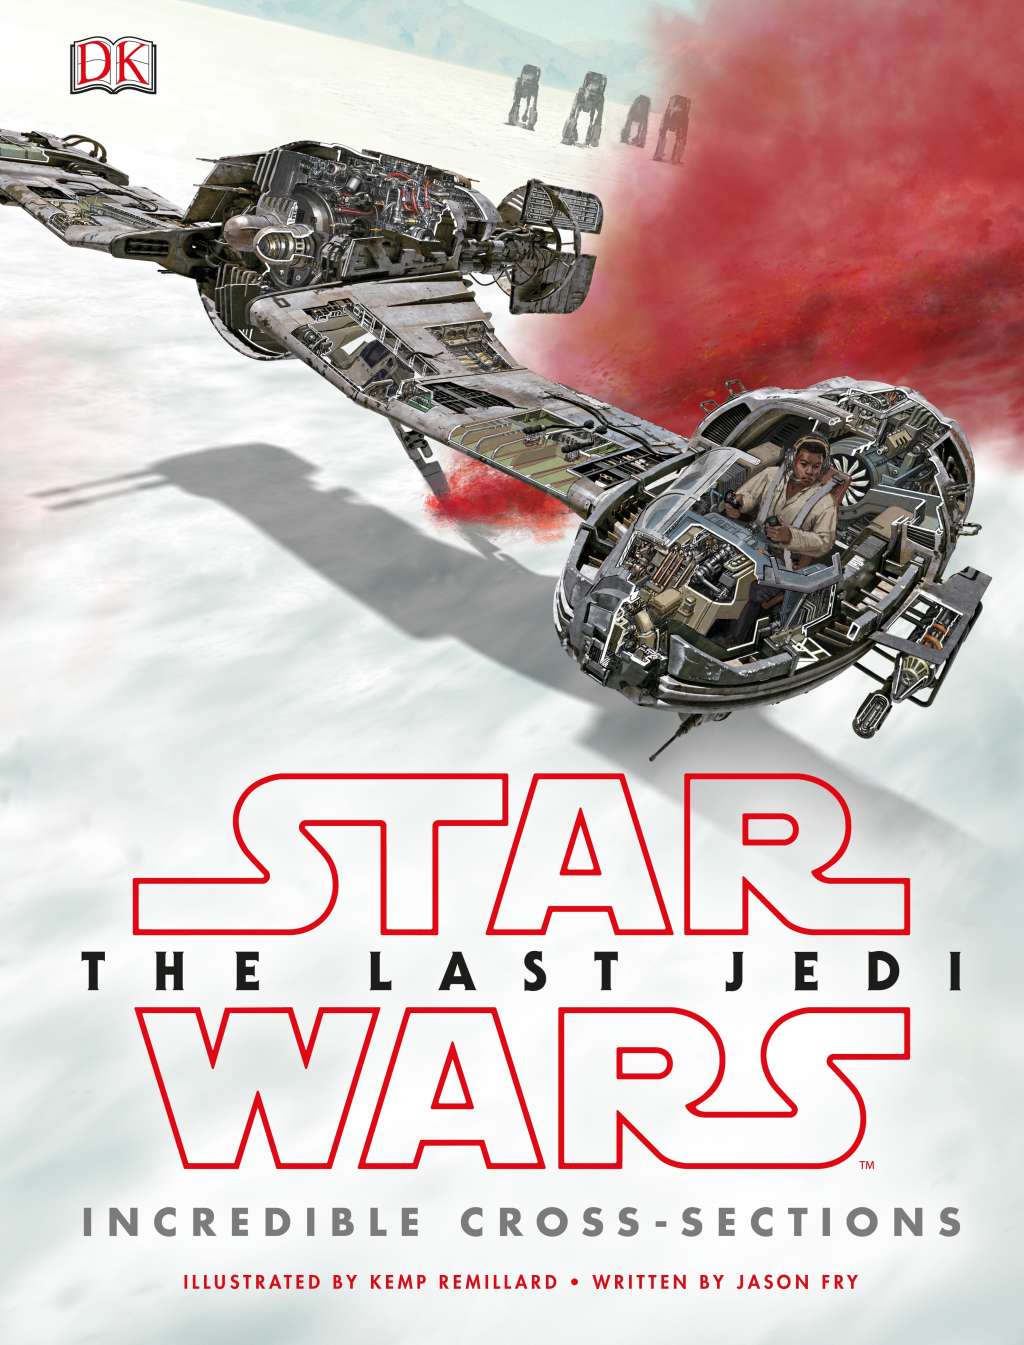 The Last Jedi: Incredible Cross-Sections